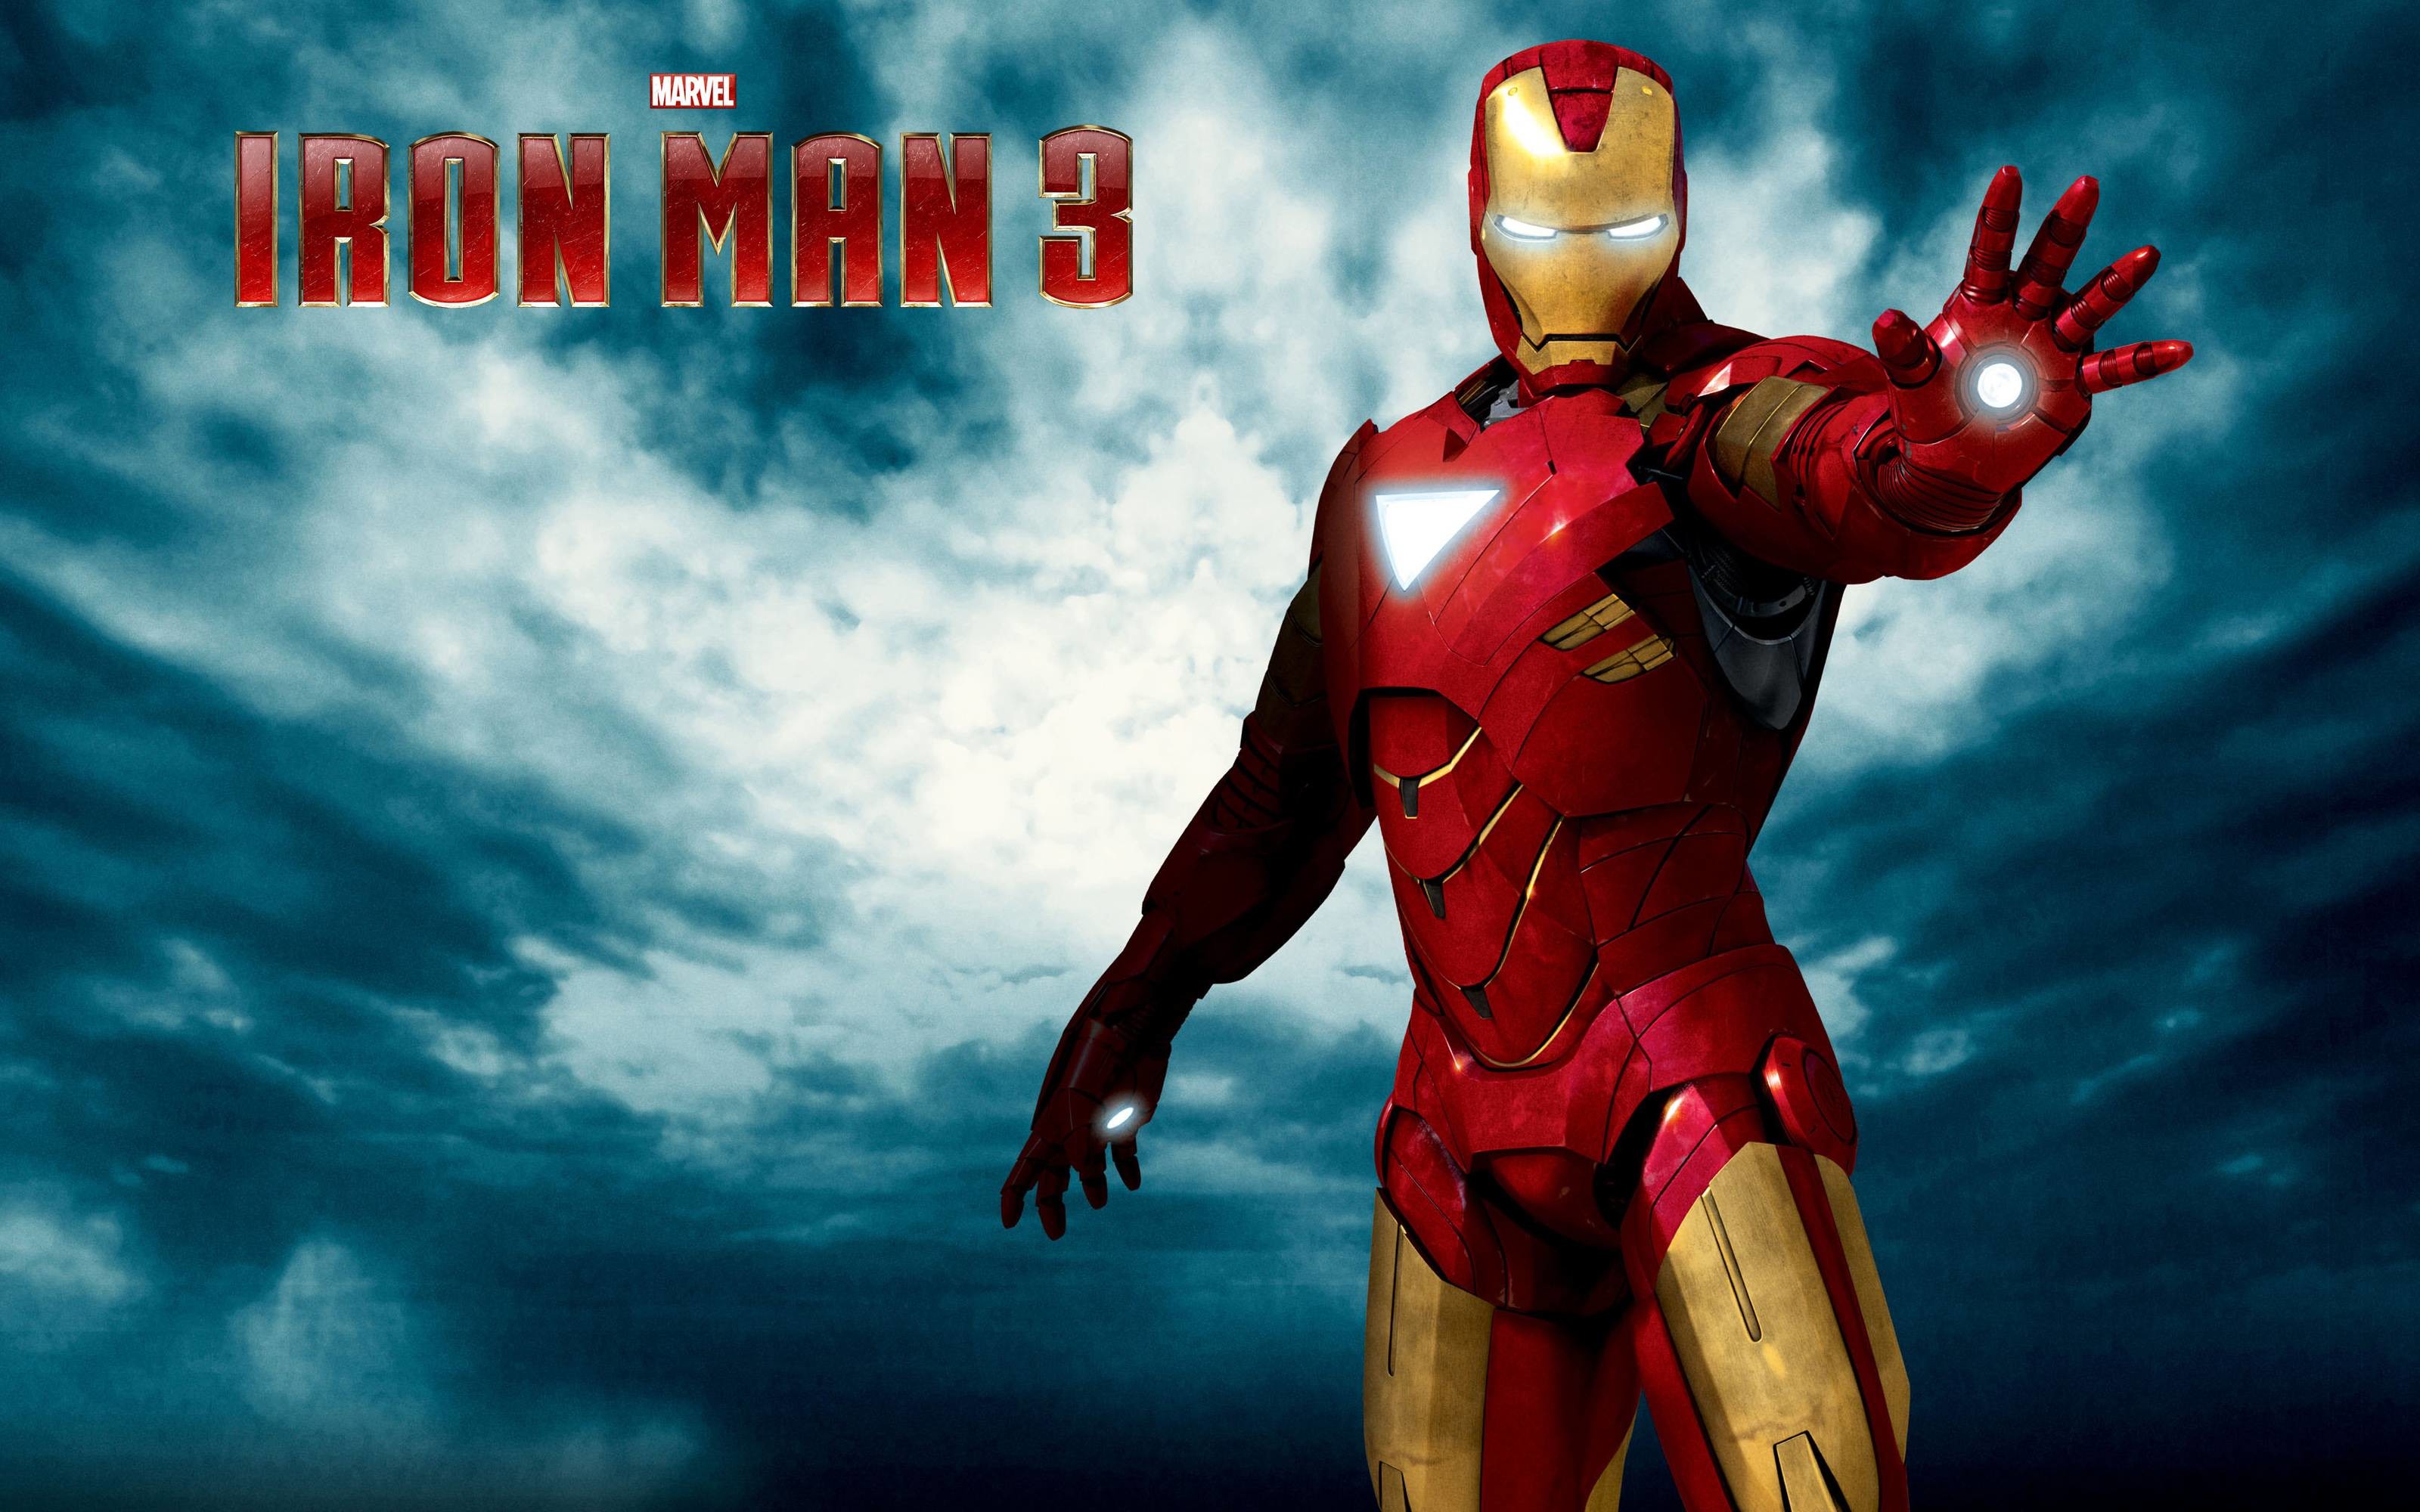 Desktop Wallpaper High Definition in 1080p with Iron Man Picture